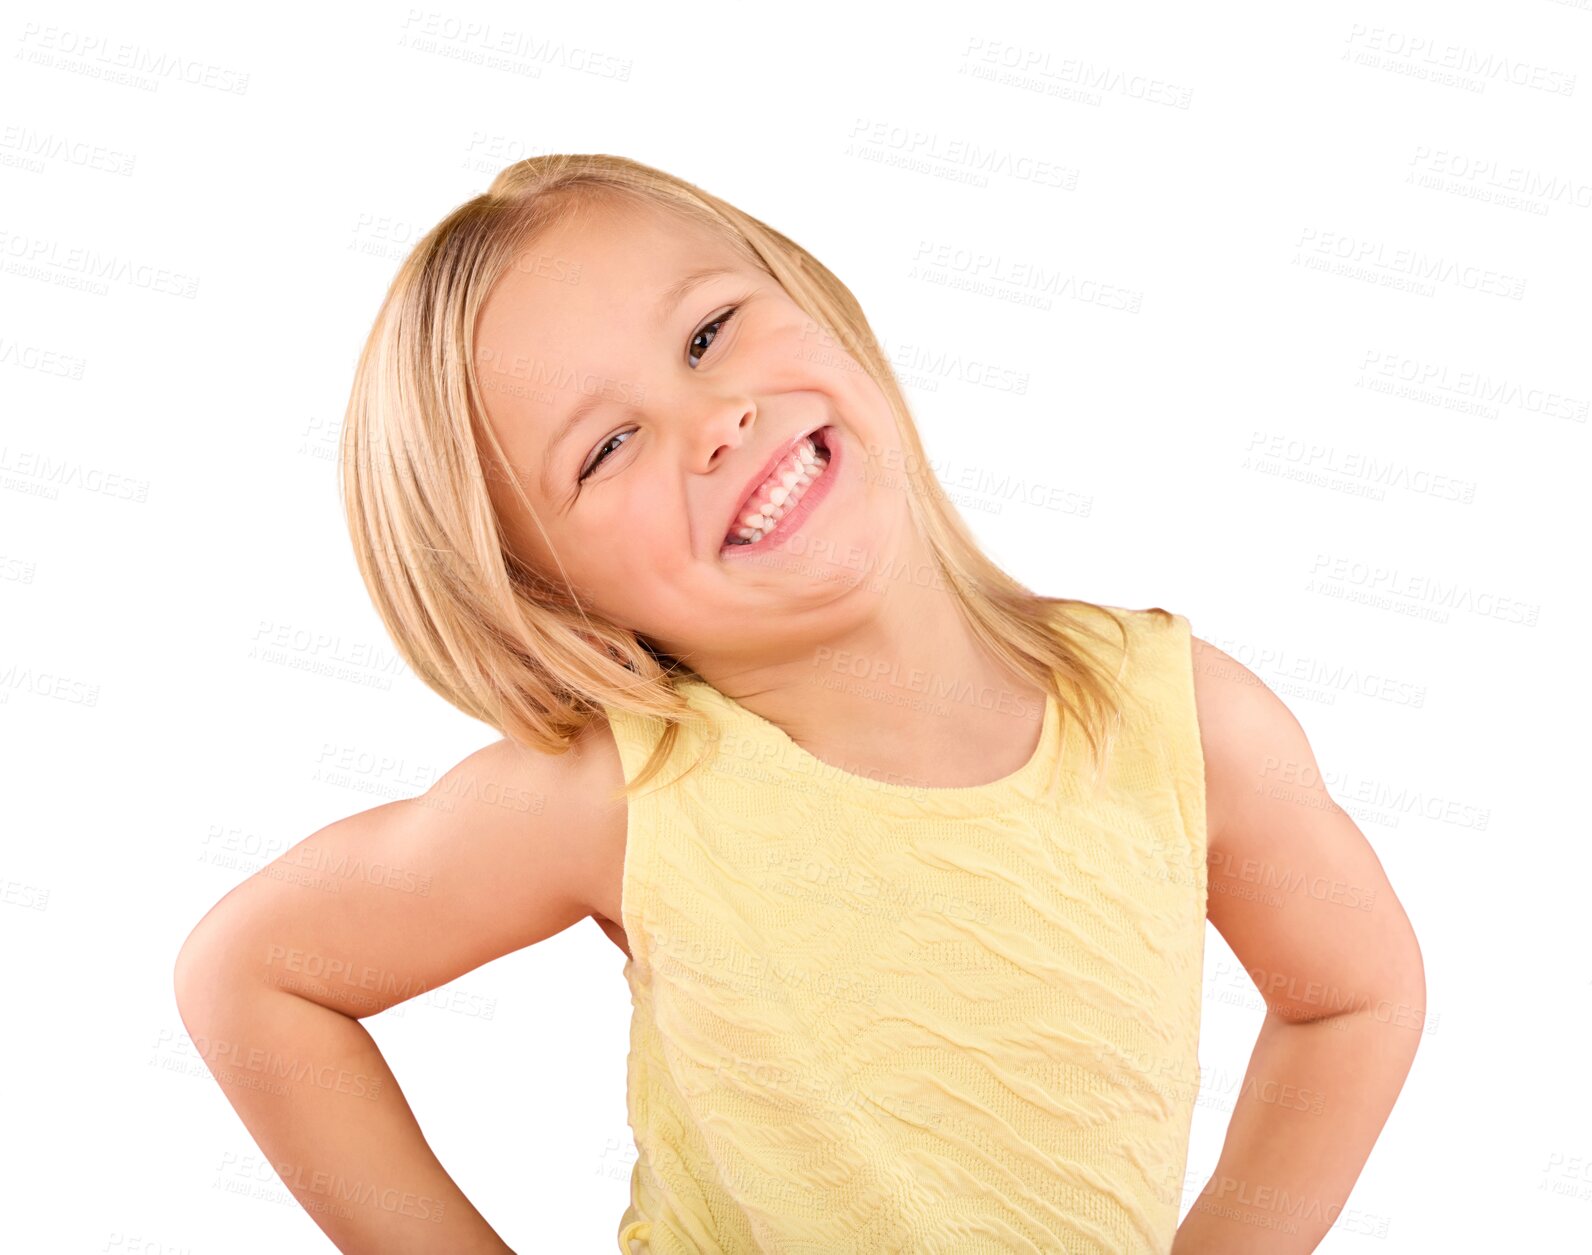 Buy stock photo Smile, happy and portrait of cute child isolated on a transparent and png background with joy. Happiness, adorable and excited young girl or kid with fashion, clothes and calm in a confident pose